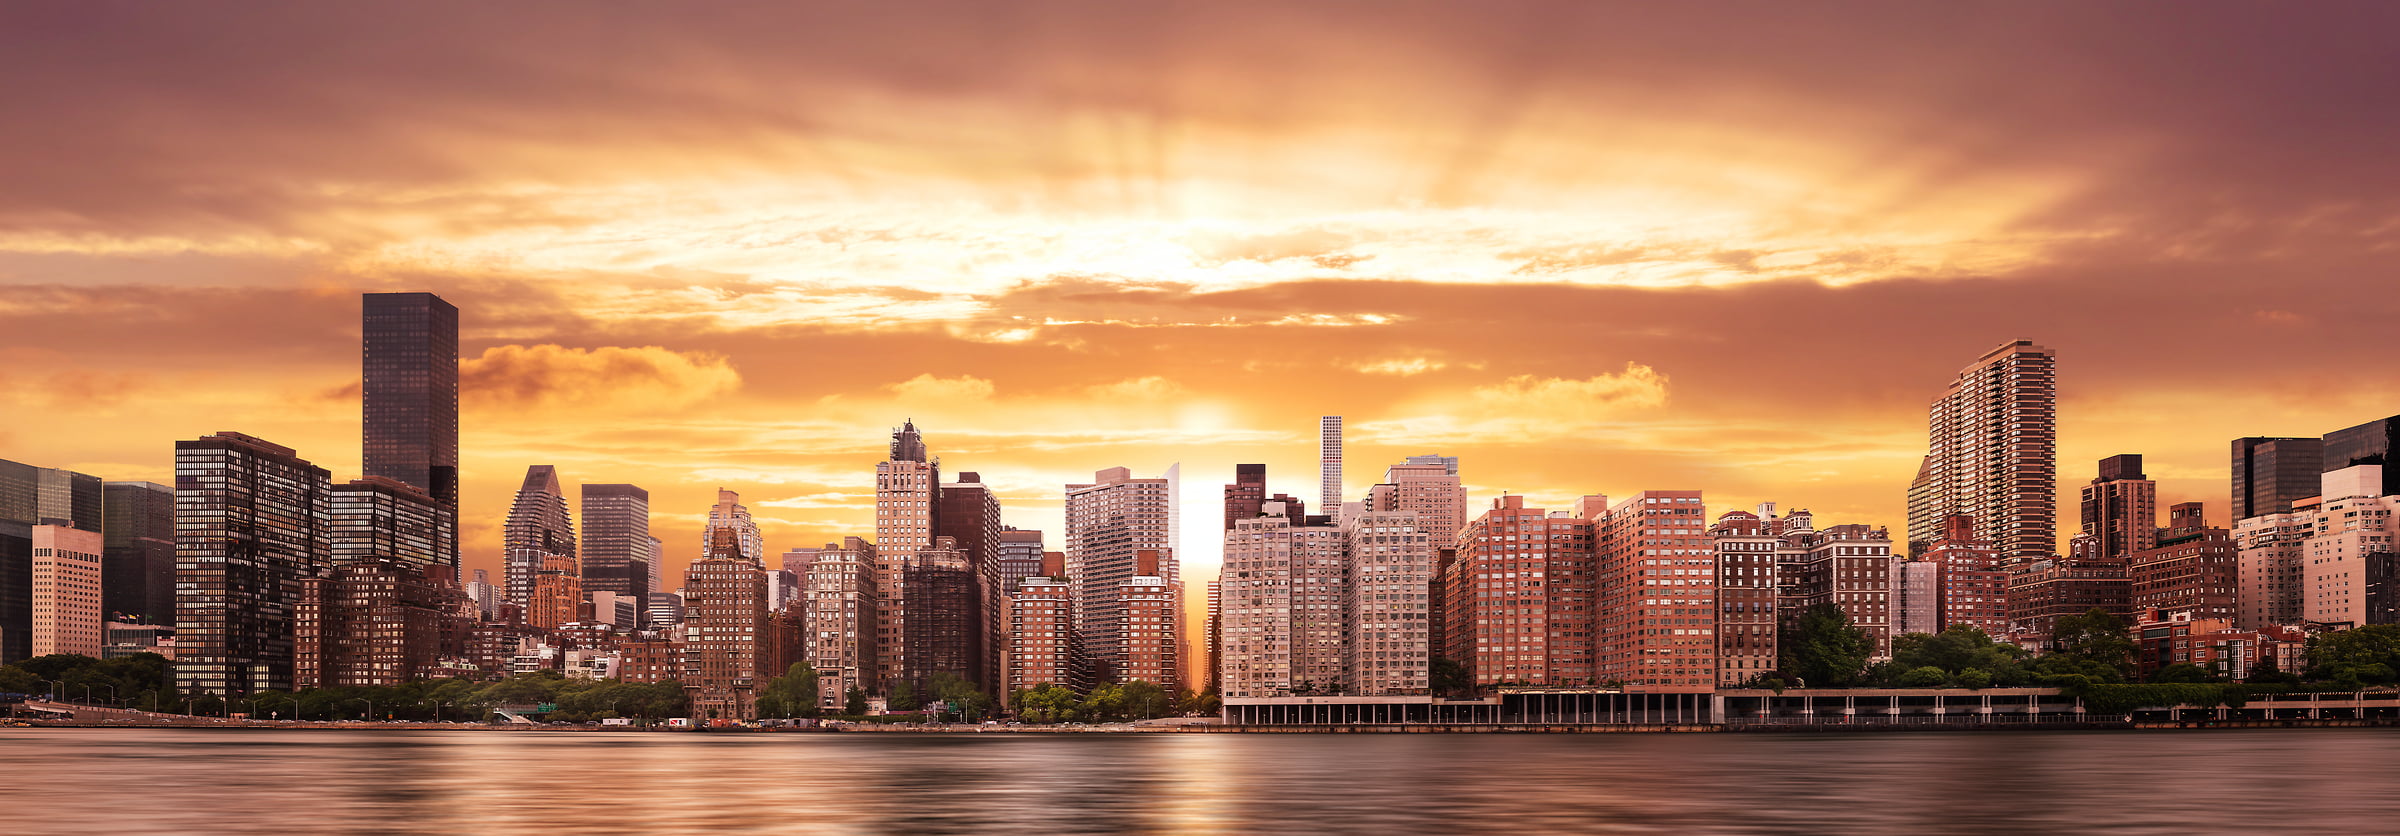 2,369 megapixels! A very high definition cityscape VAST photo of the midtown Manhattan city skyline and East River during a beautiful sunset in New York City; created by Dan Piech.